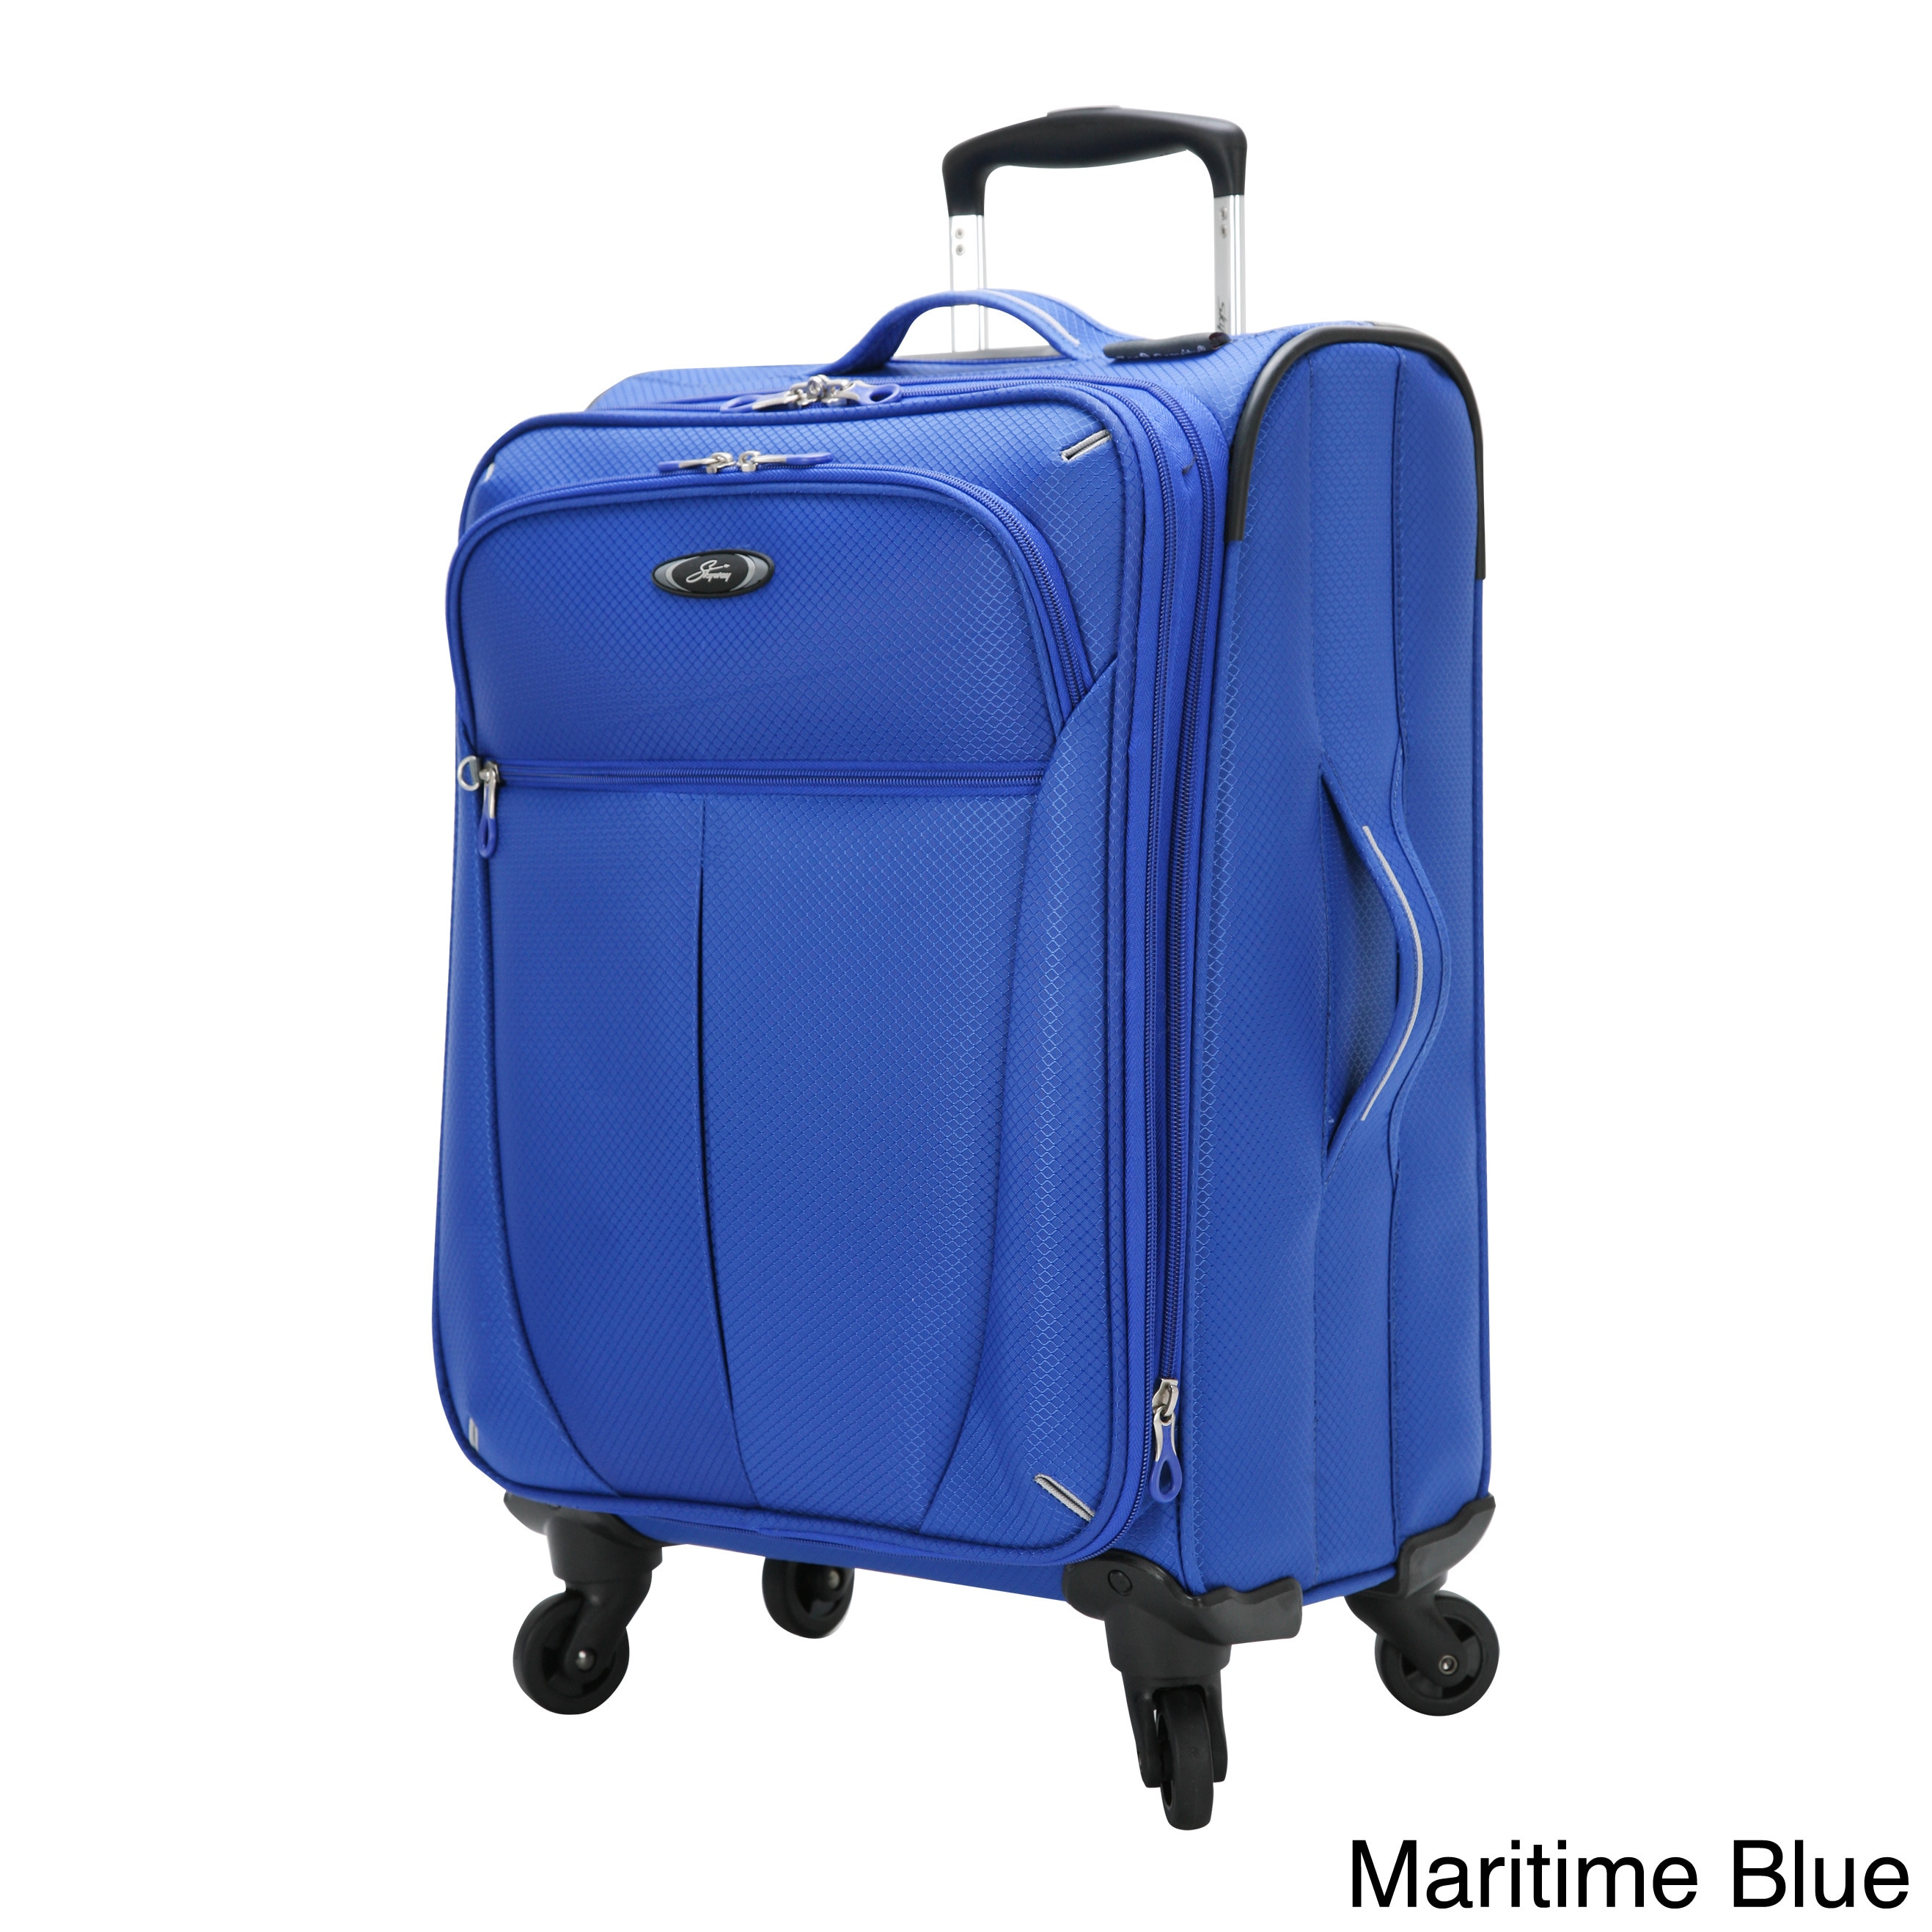 Skyway Mirage Ultralite 20 inch 4 wheel Expandable Carry on